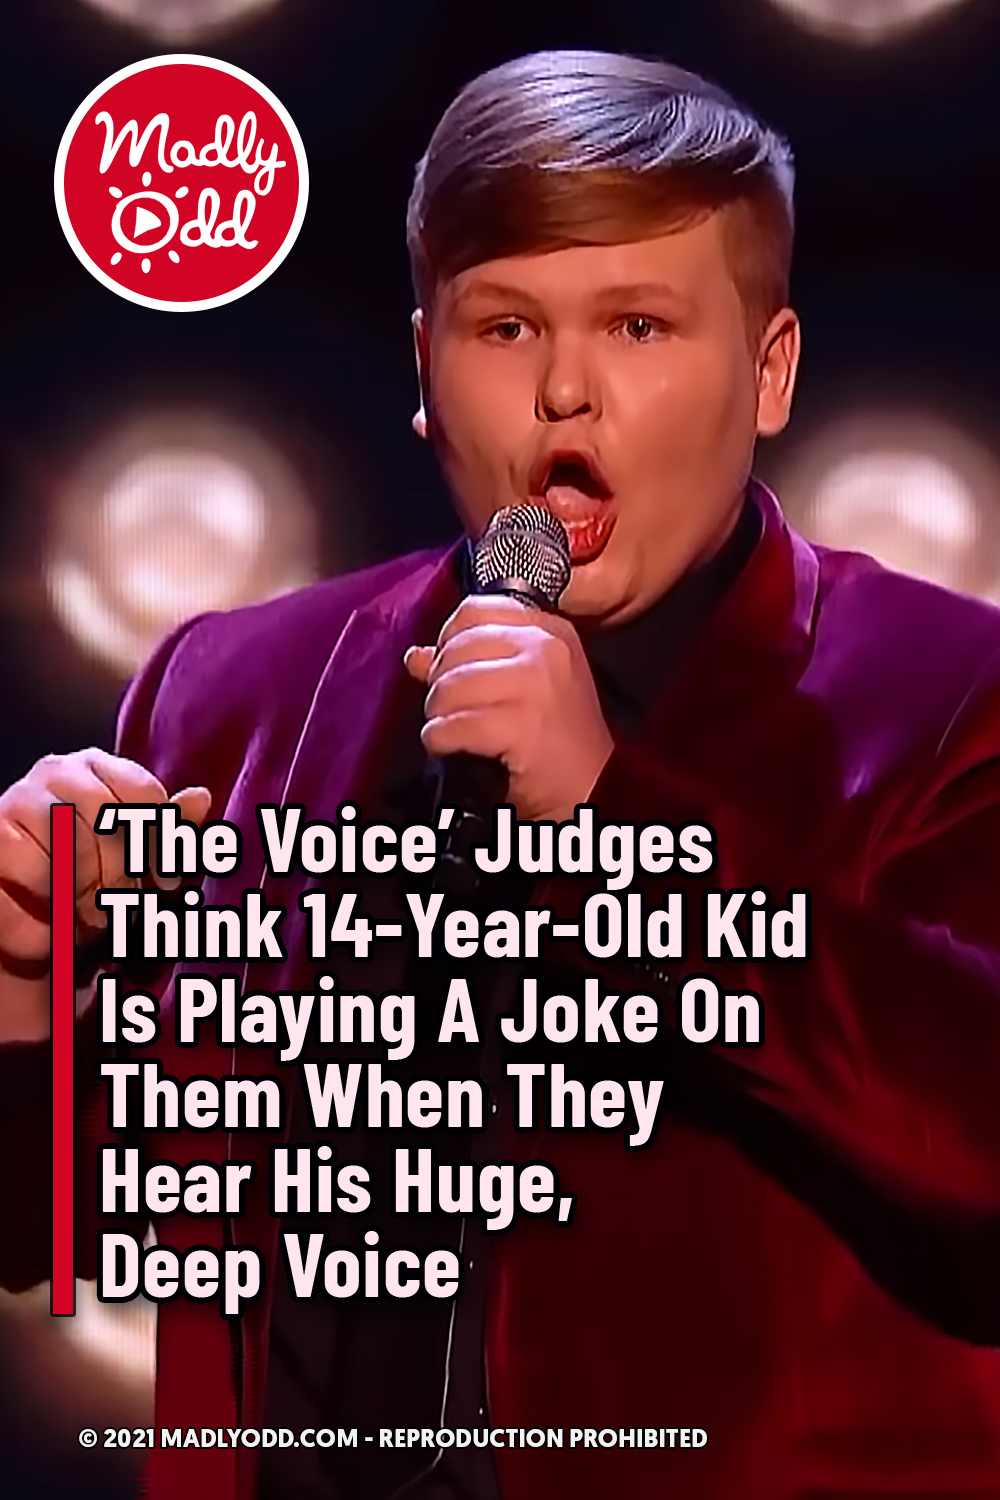 ‘The Voice’ Judges Think 14-Year-Old Kid Is Playing A Joke On Them When They Hear His Huge, Deep Voice